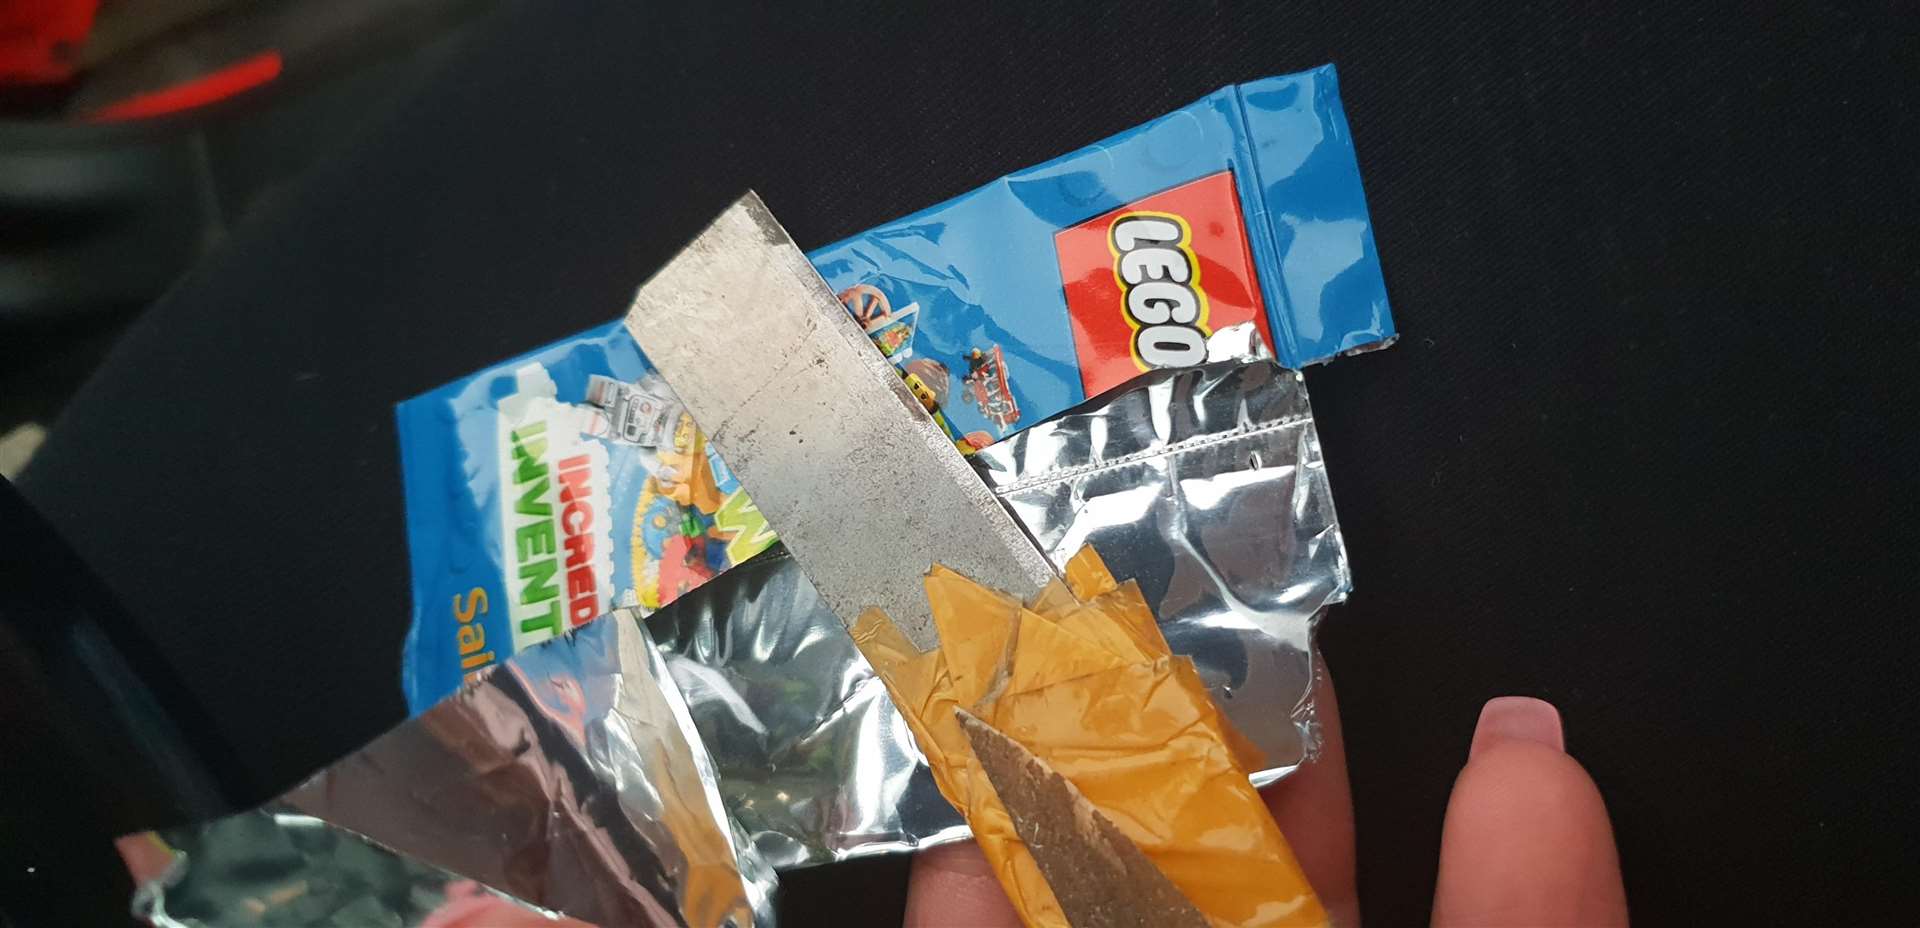 The blade was found in a free packet of Lego collectors' cards from Sainsbury's